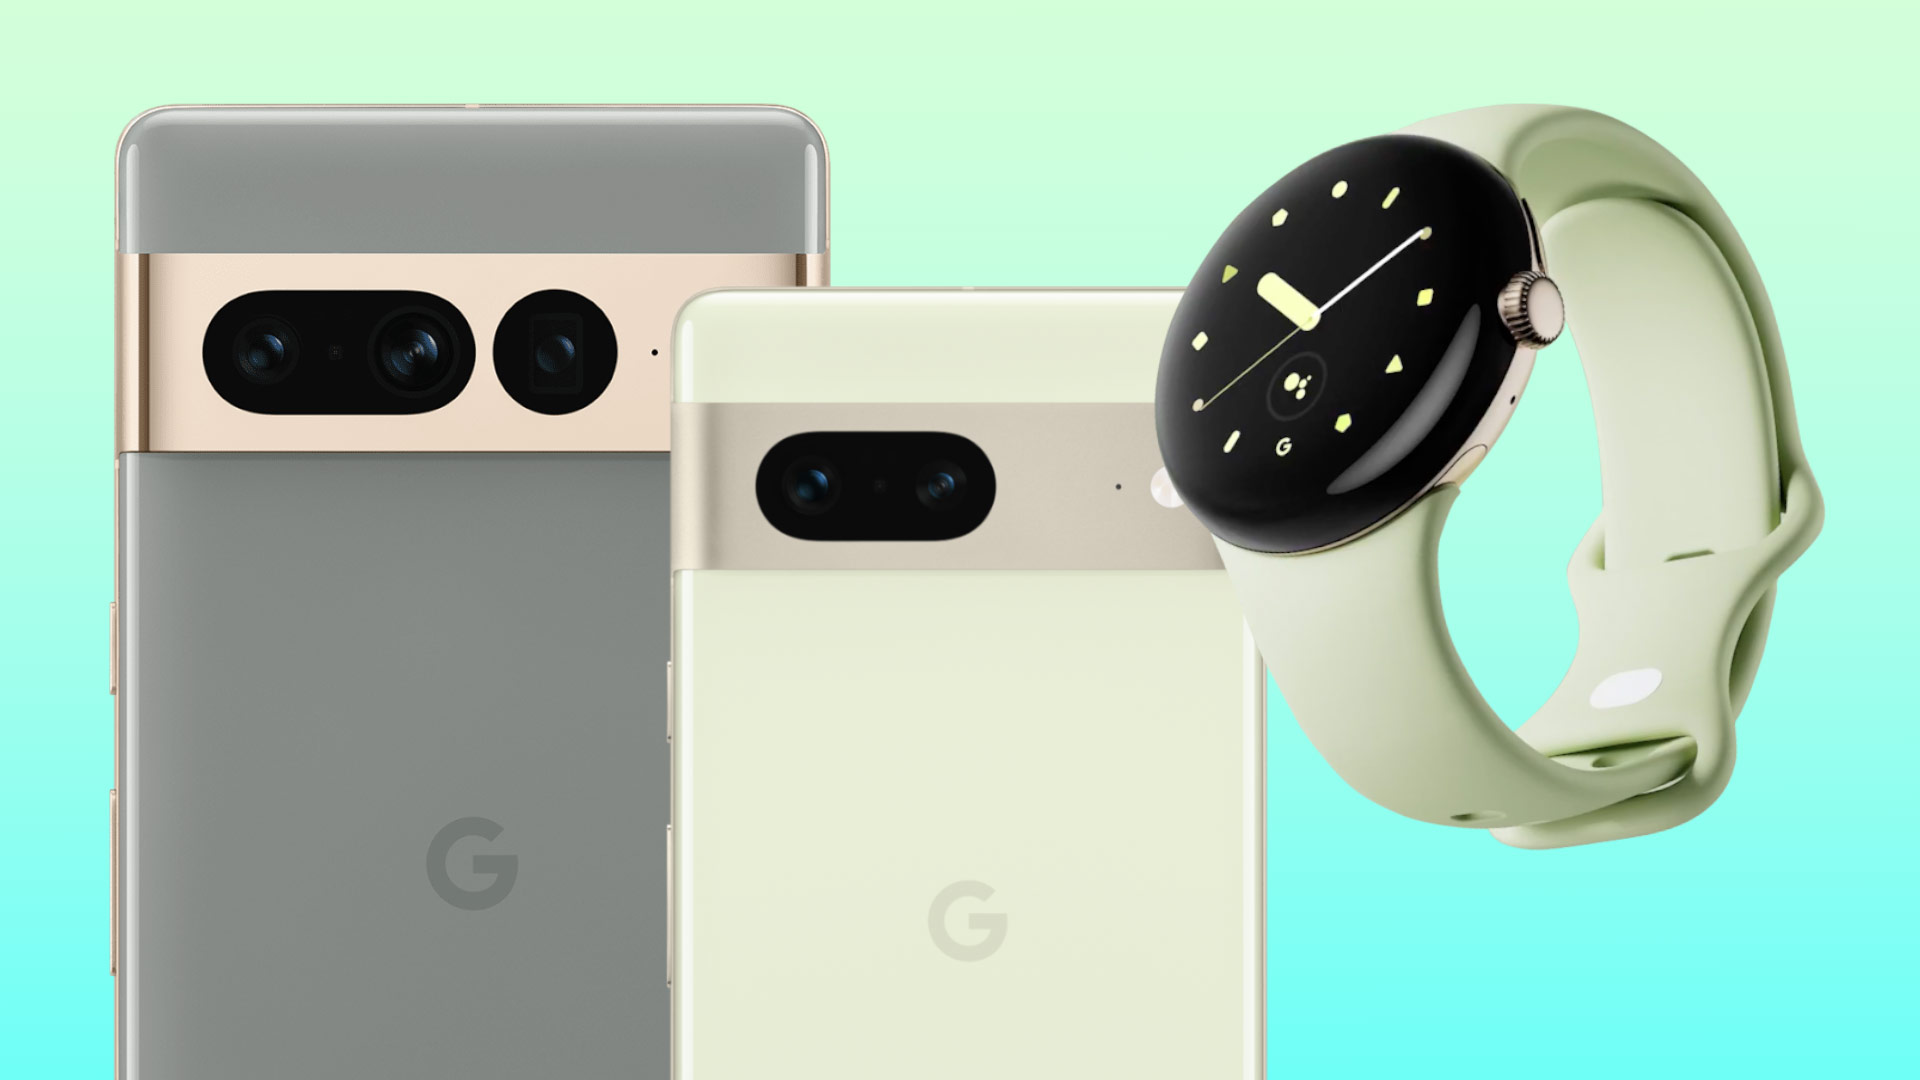 Google Pixel 7 and Pixel 7 Pro phones and Google Pixel Watch on a green-blue background